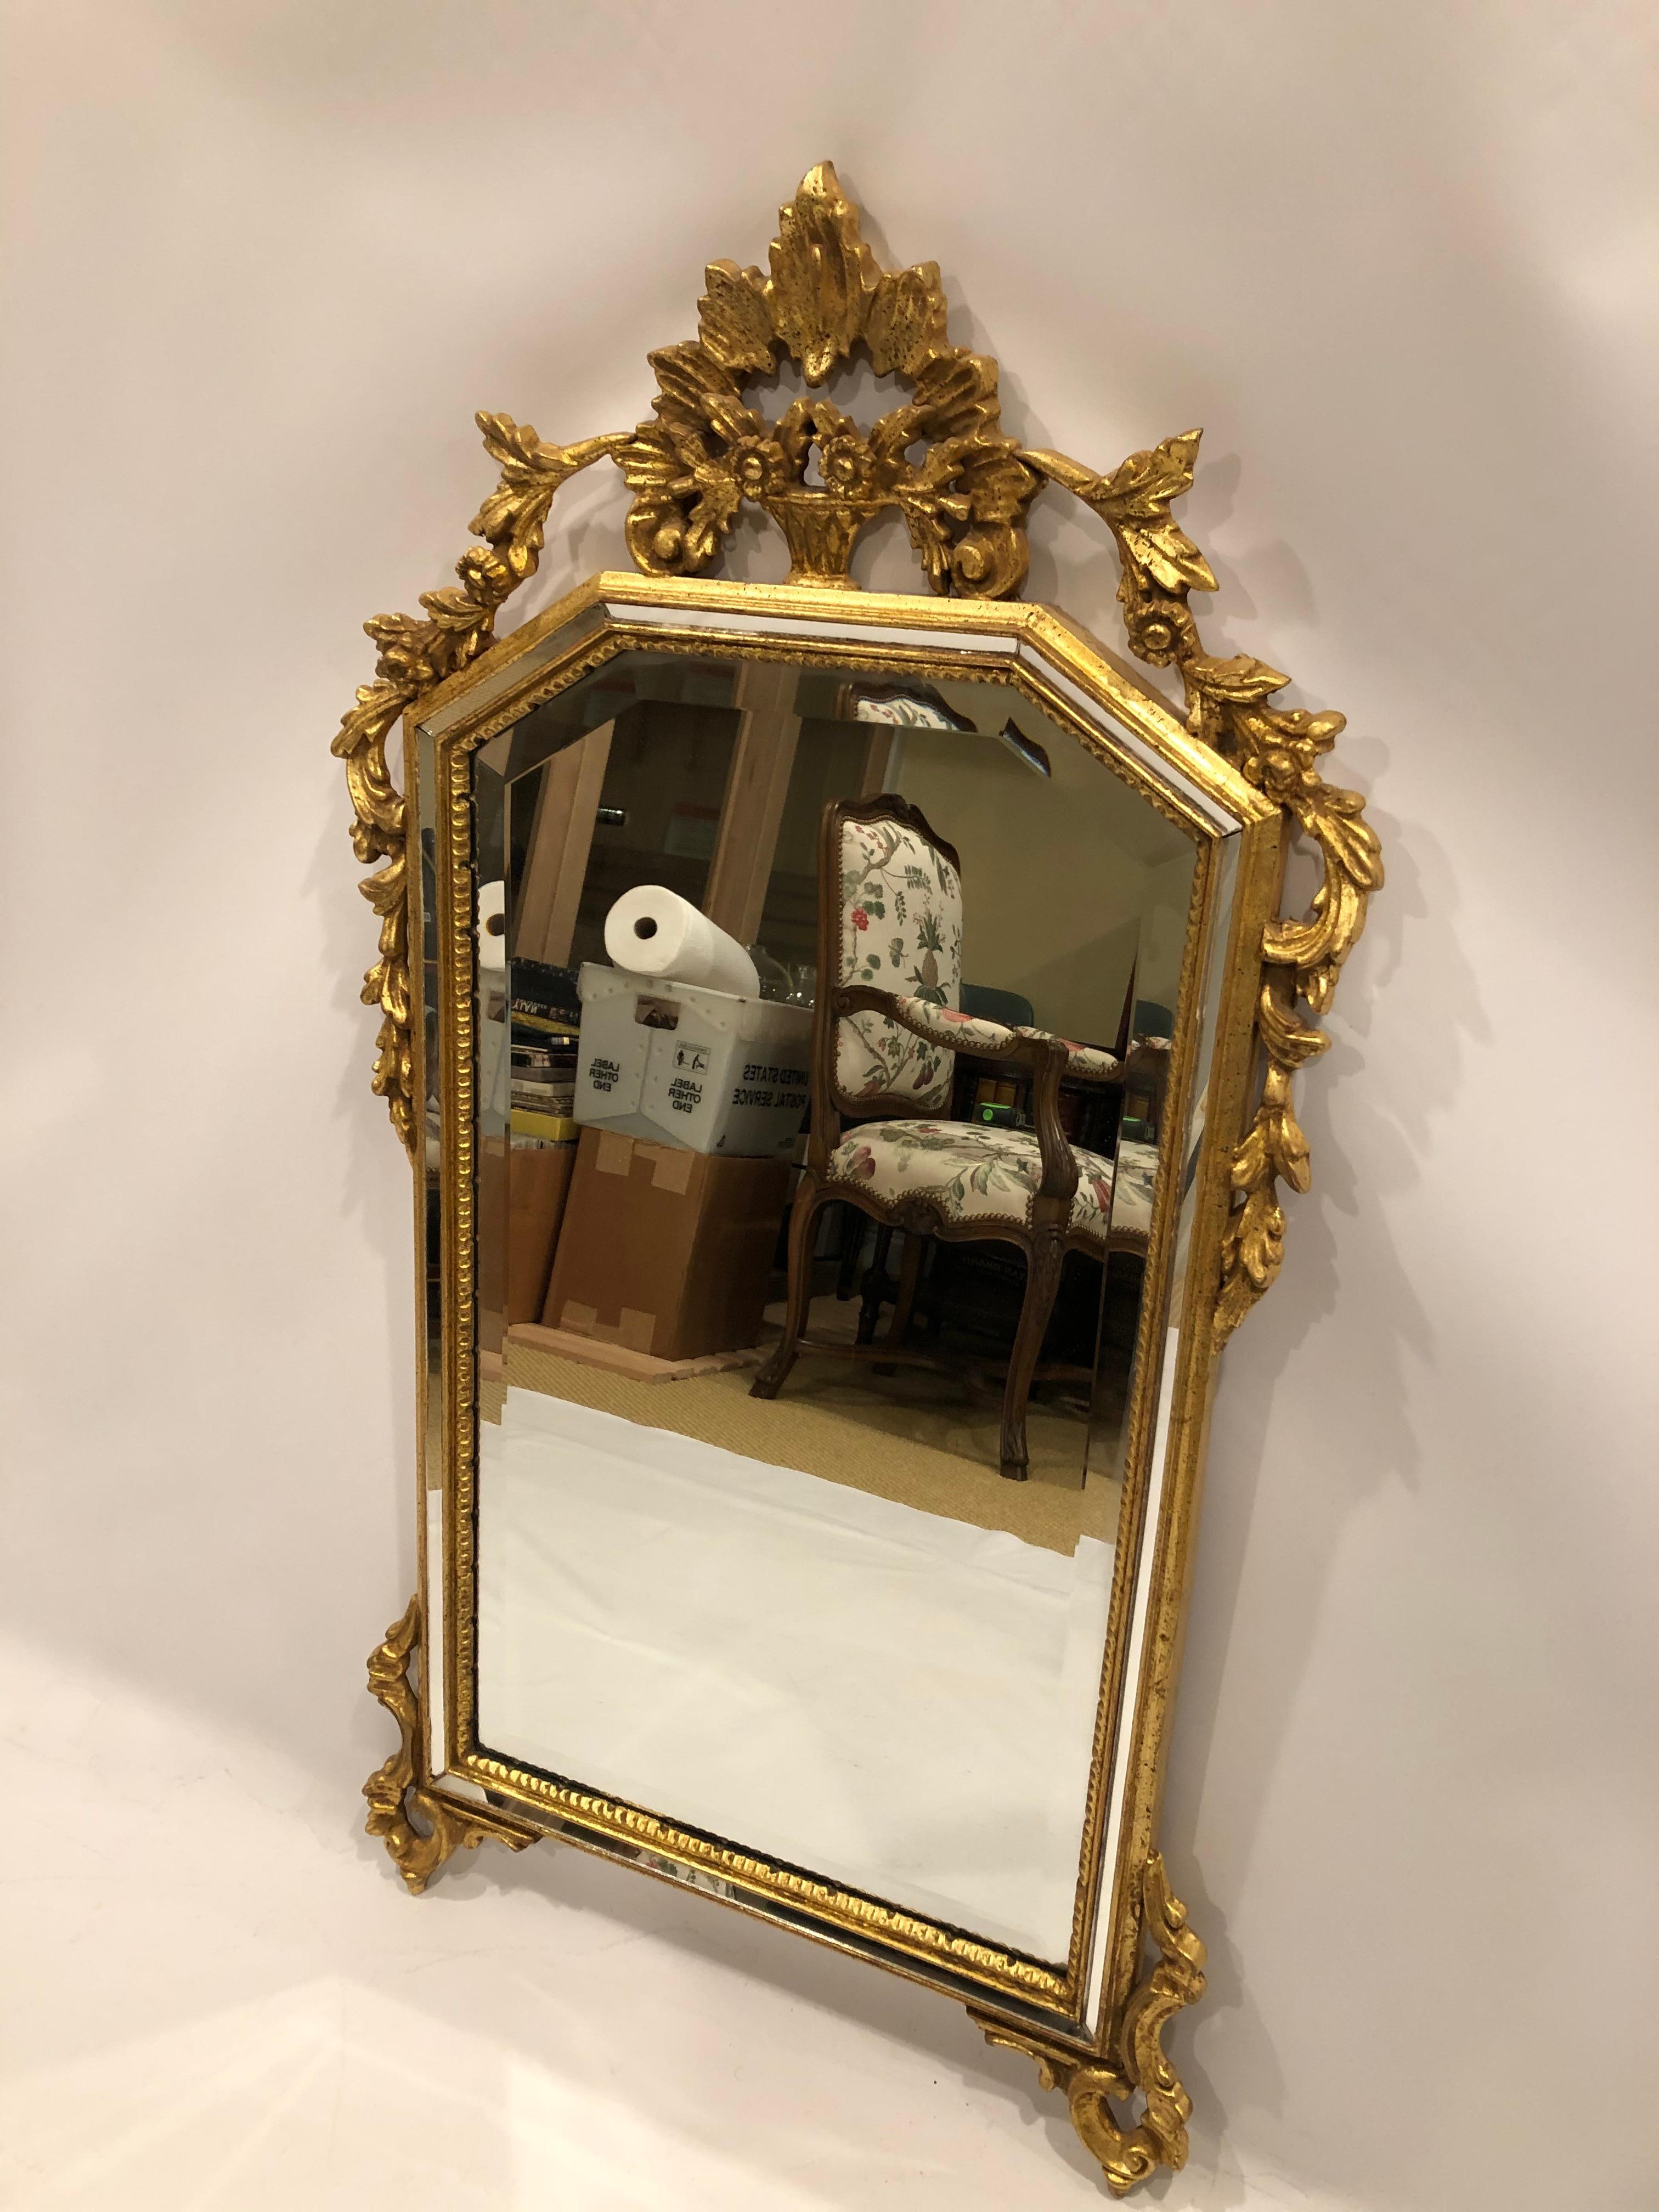 Very pretty carved giltwood mirror having tasteful adornments around the top edges and bottom and lovely triangular crest at the top. A special touch is the inlaid narrow bands of mirror that create a border within the frame.